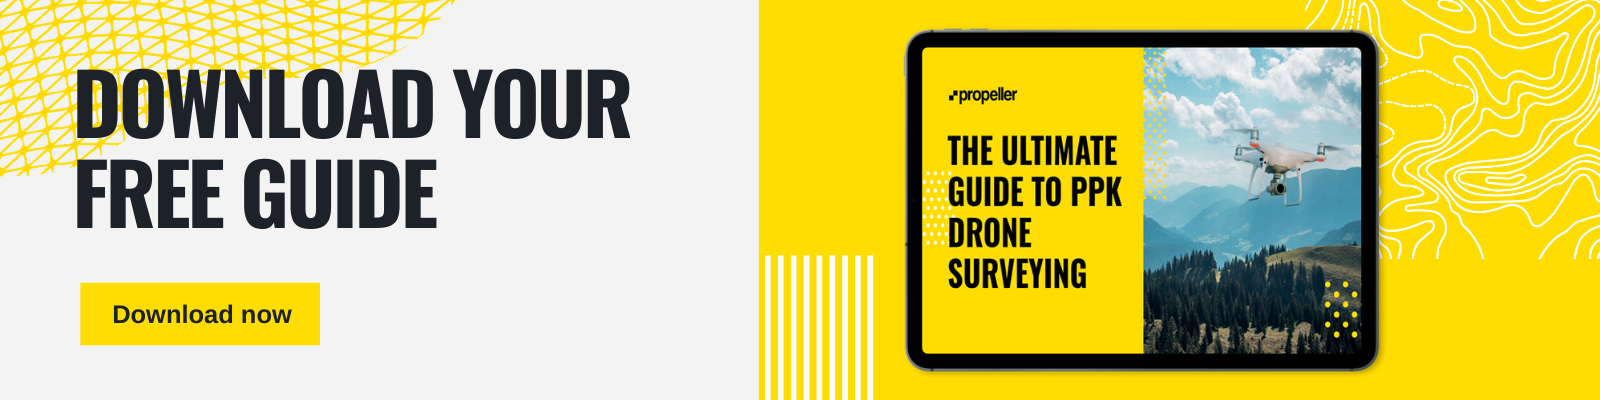 Ultimate Guide to PPK Drone Surveying